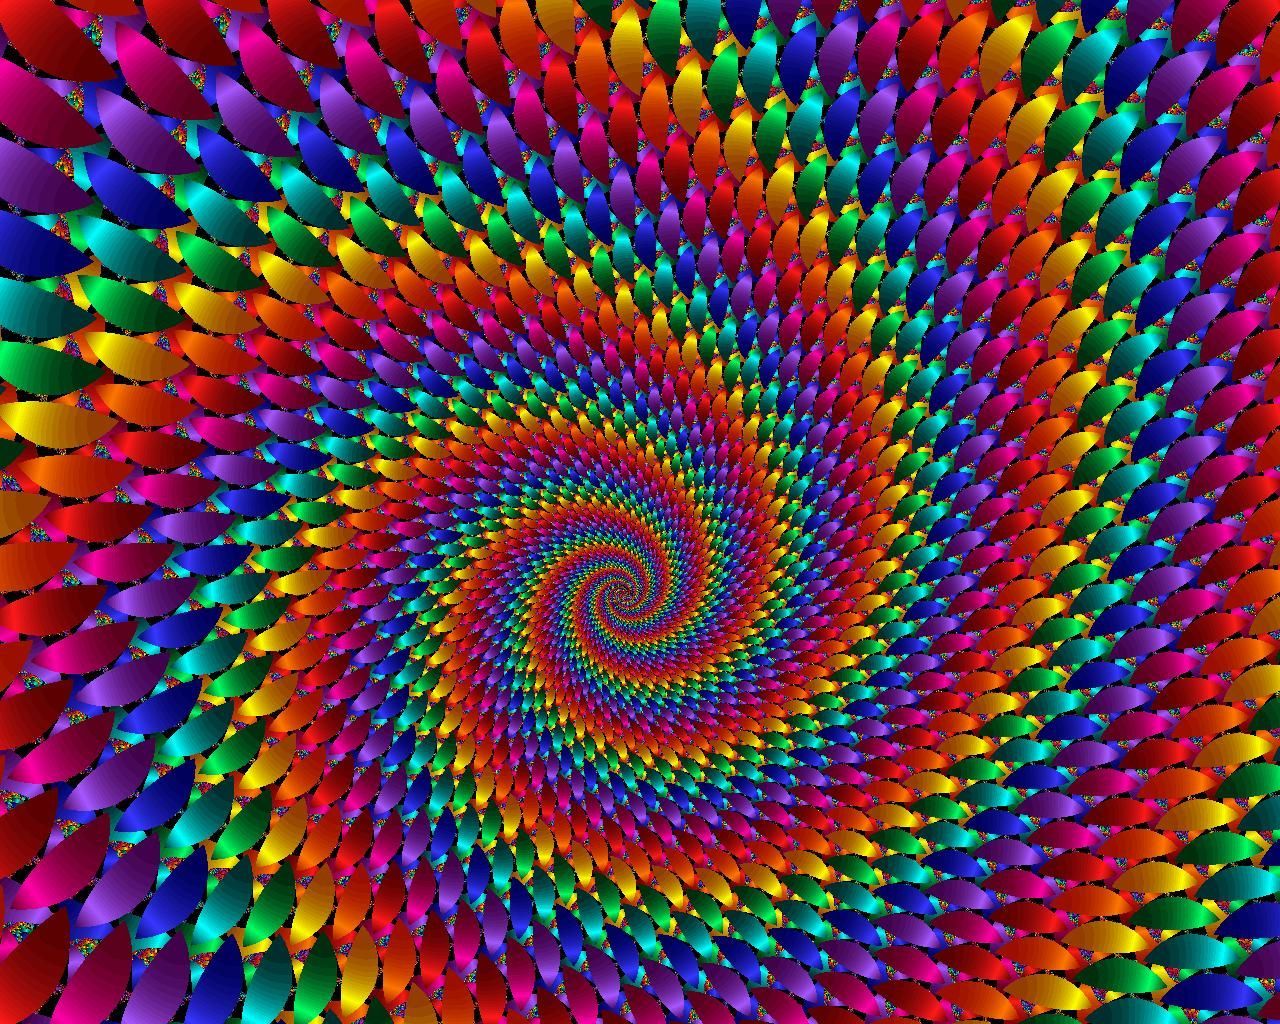 Psychedelic Spiral Wallpaper, HD Psychedelic Spiral Background on WallpaperBat